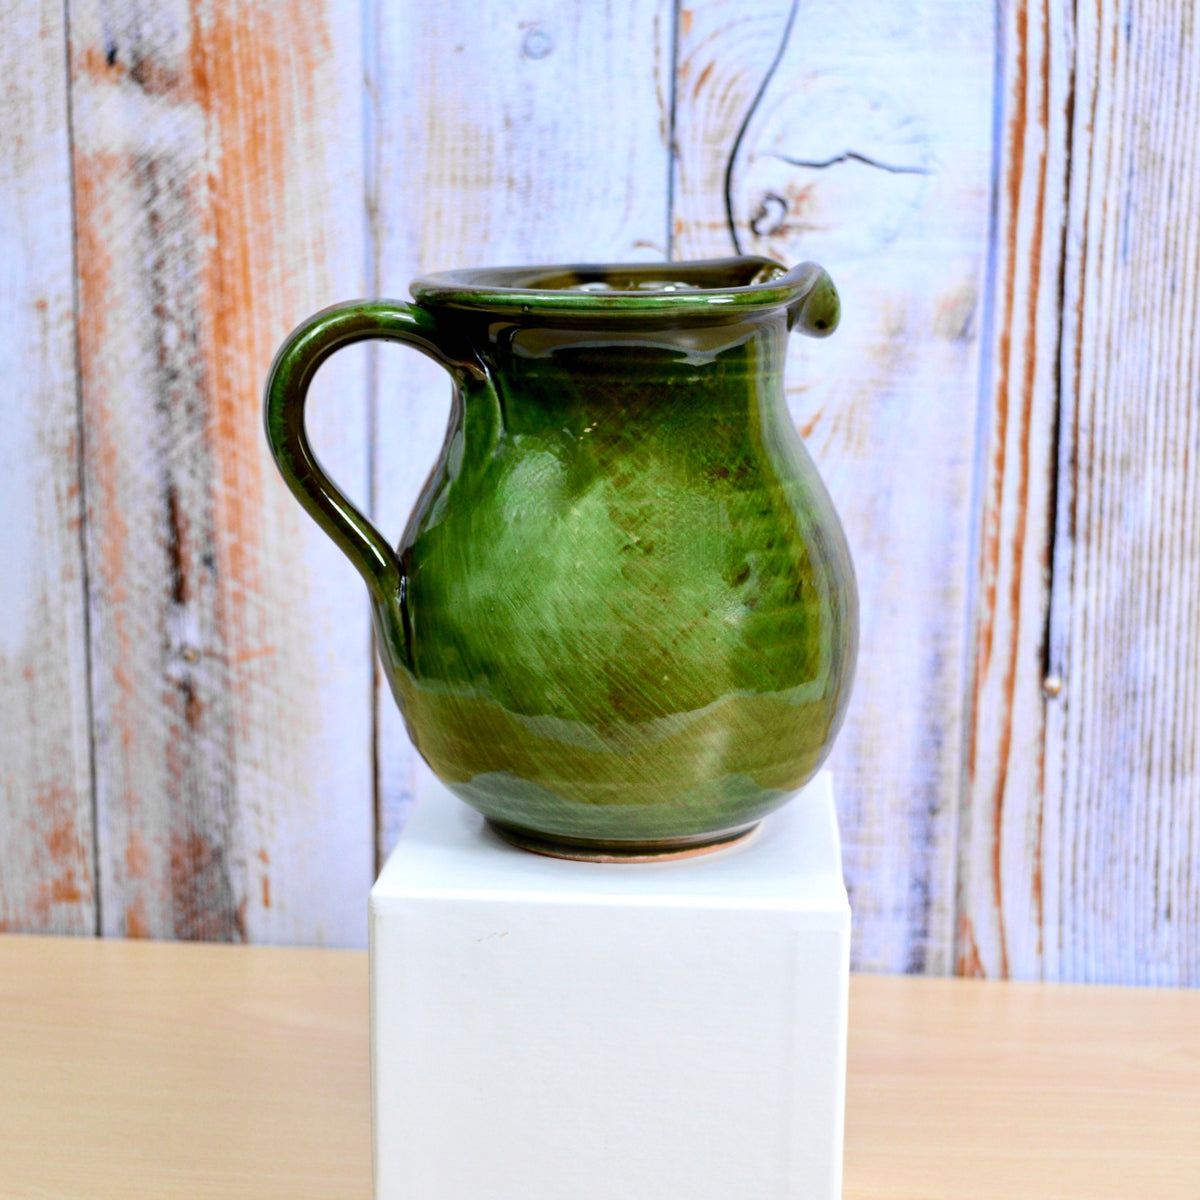 Tuscan Ceramic Small Pitcher, Multiple Colors, Made in Italy - My Italian Decor